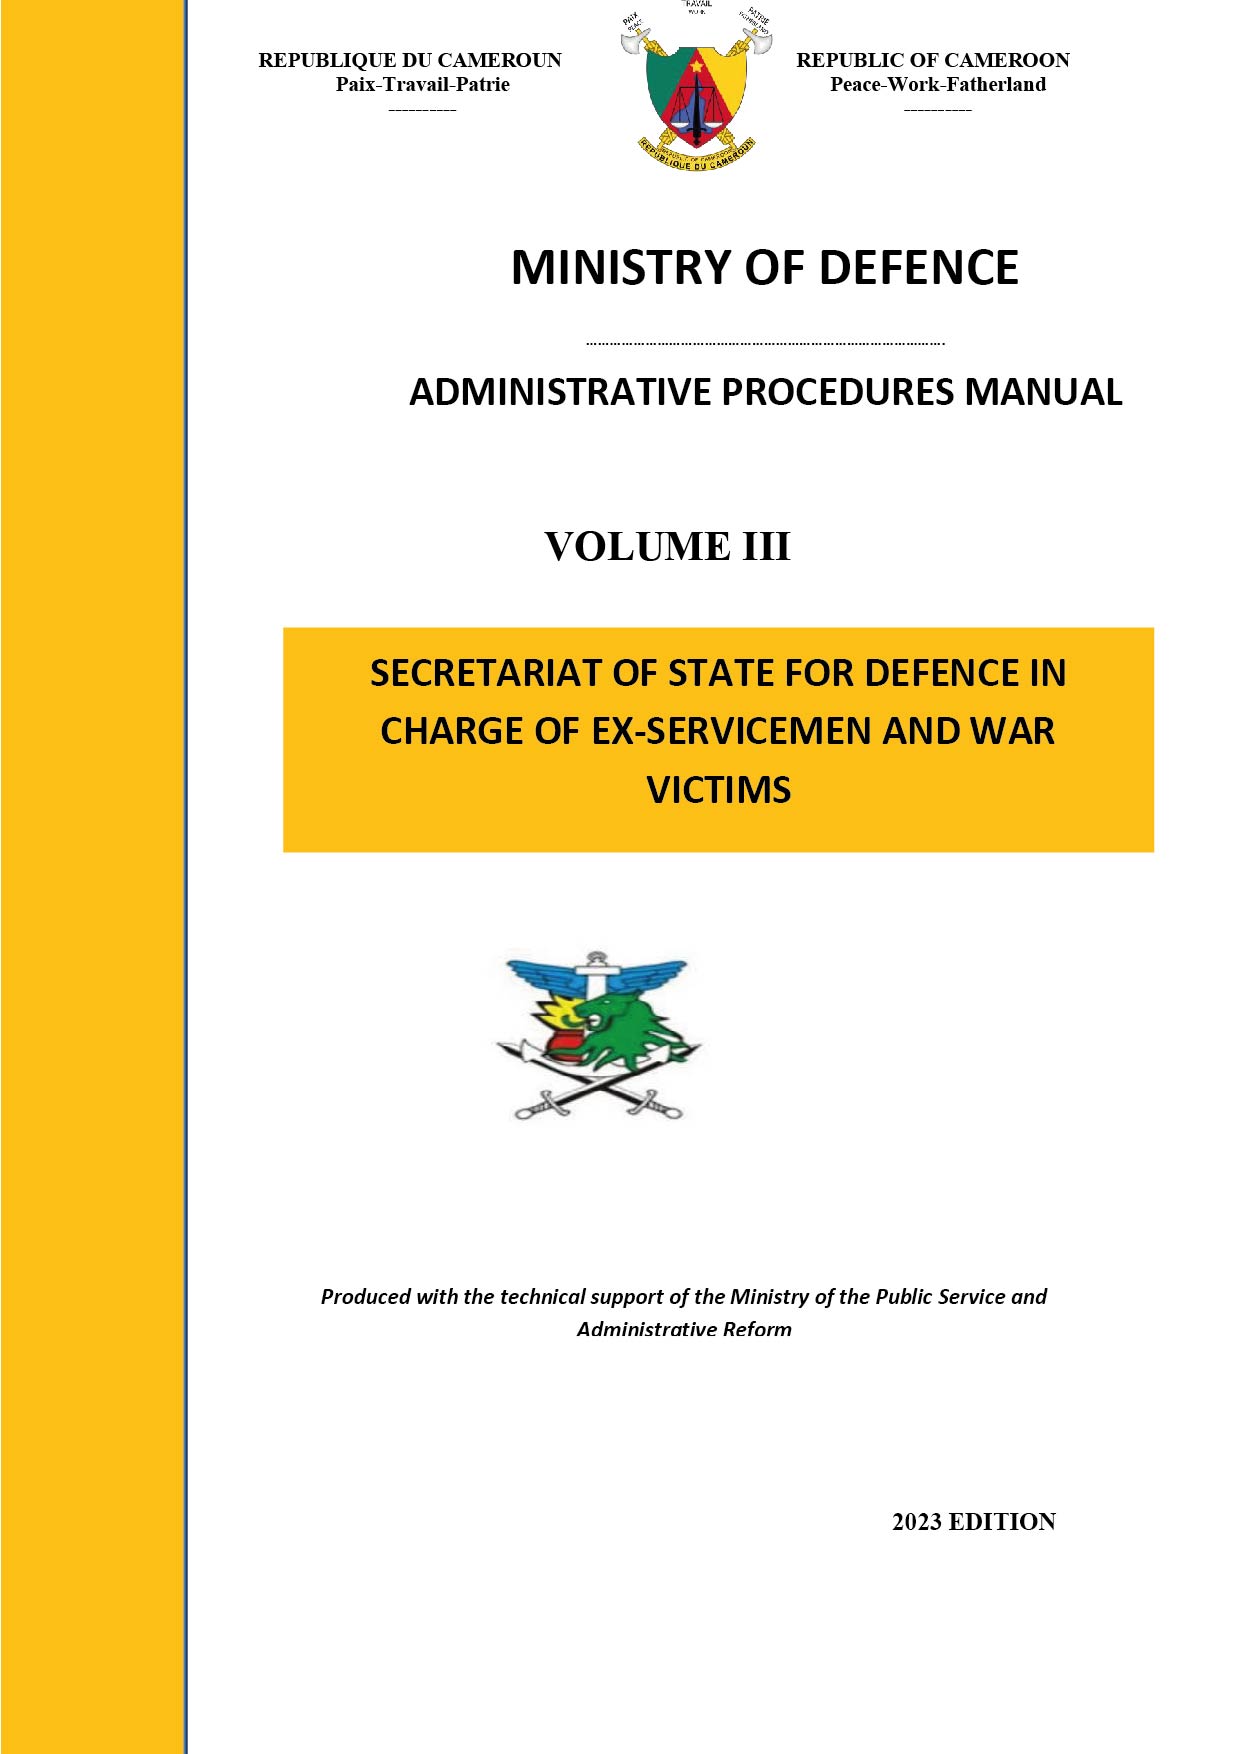 ADMINISTRATIVE PROCEDURES MANUAL SECRETARIAT OF STATE FOR DEFENCE IN CHARGE OF EX-SERVICEMEN AND WAR VICTIMS VOLUME III